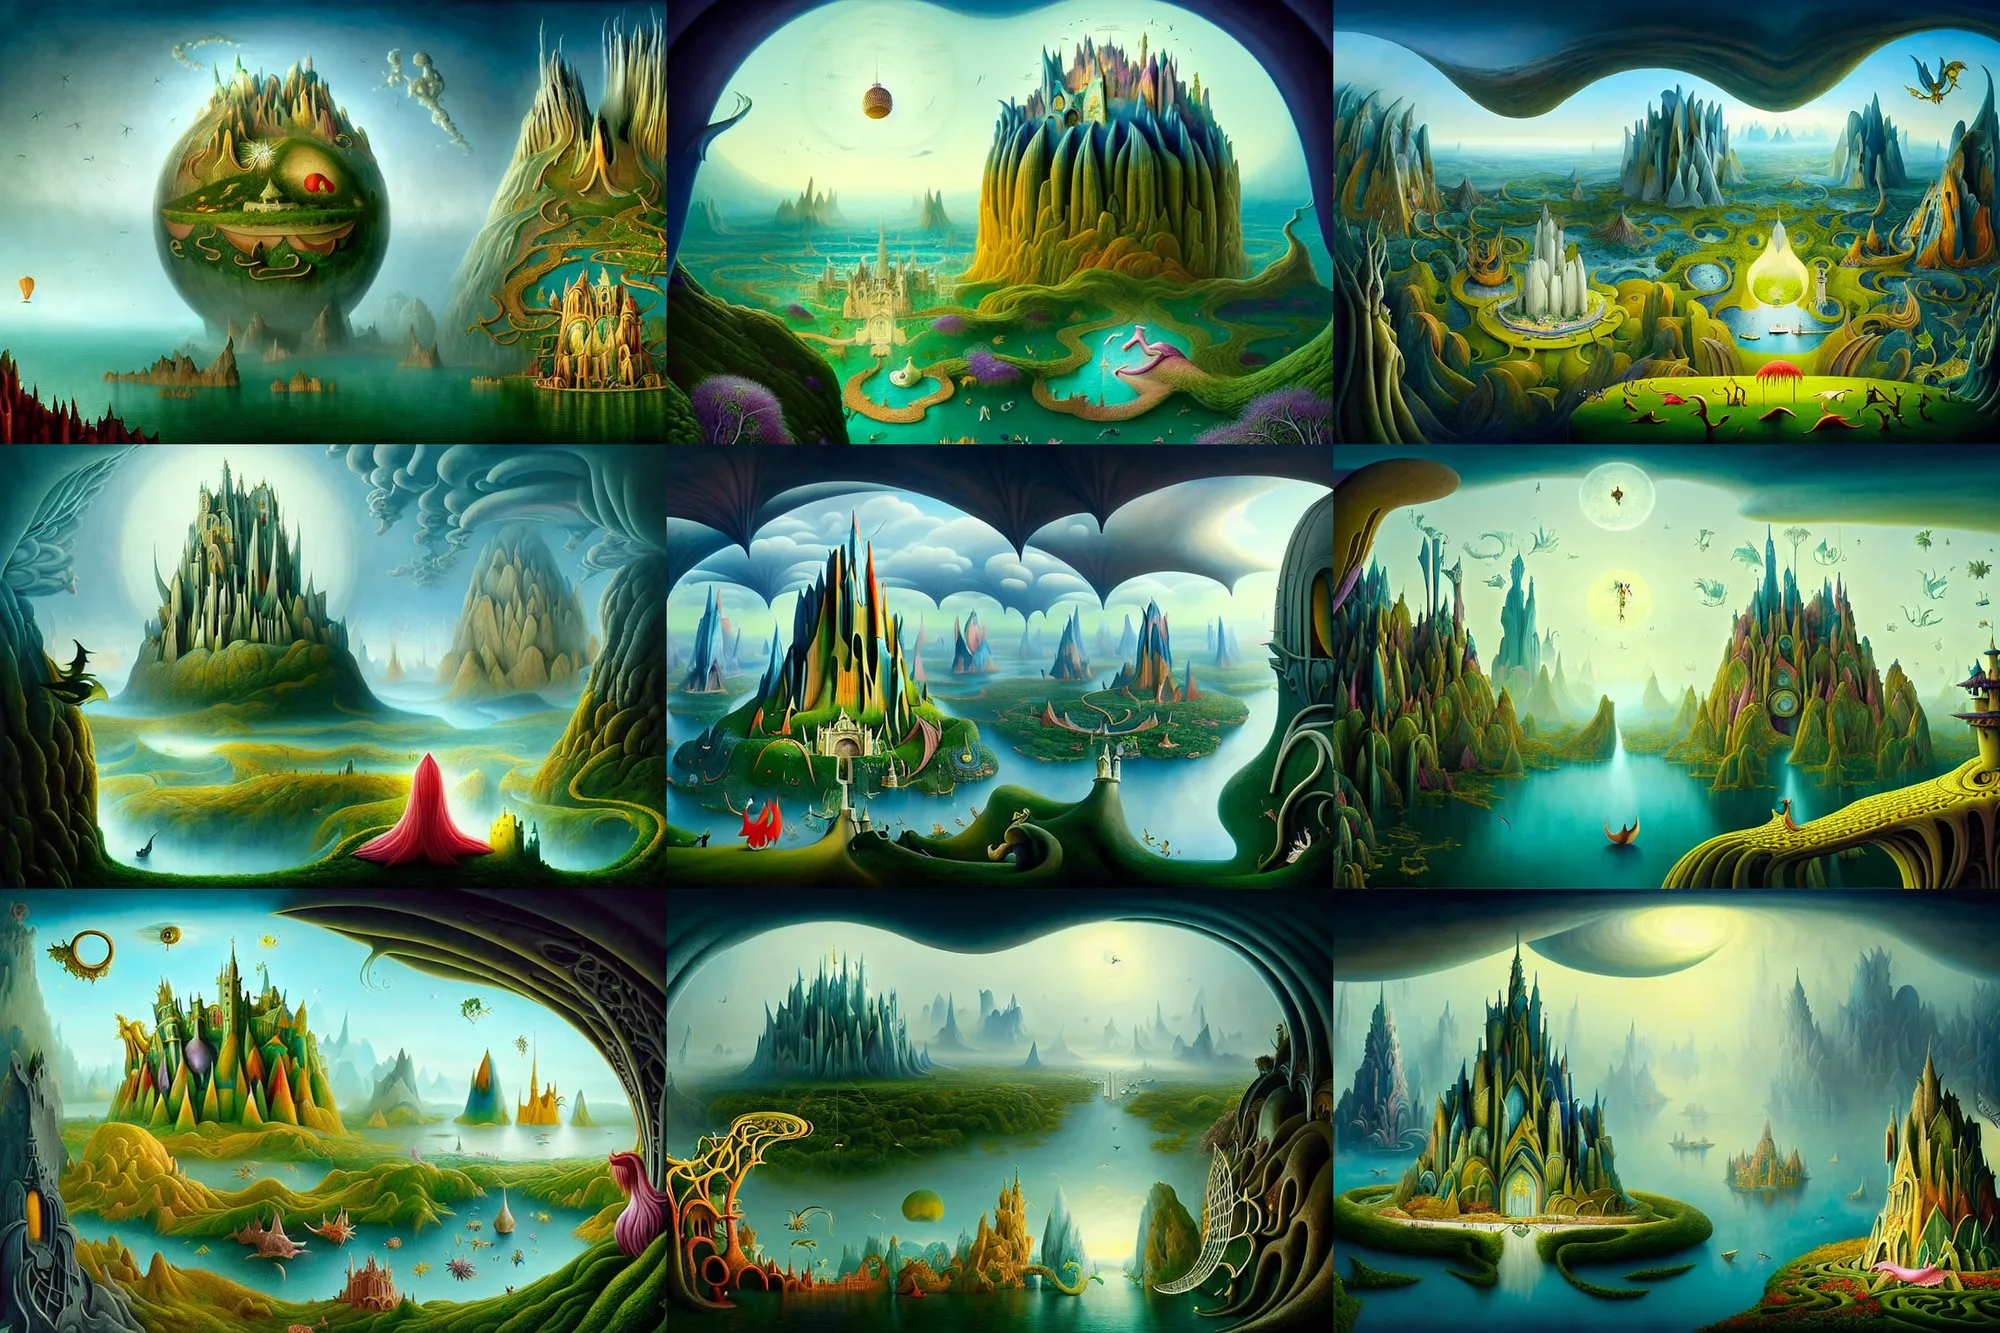 Prompt: a beguiling epic stunning beautiful and insanely detailed matte painting of windows into dream worlds with surreal architecture designed by Heironymous Bosch, dream world populated with mythical whimsical creatures, mega structures inspired by Heironymous Bosch's Garden of Earthly Delights, vast surreal landscape and horizon by Cyril Rolando and Jeremiah Ketner and Andrew Ferez, masterpiece!!!, grand!, imaginative!!!, whimsical!!, epic scale, intricate details, sense of awe, elite, wonder, insanely complex, masterful composition!!!, sharp focus, fantasy realism, dramatic lighting